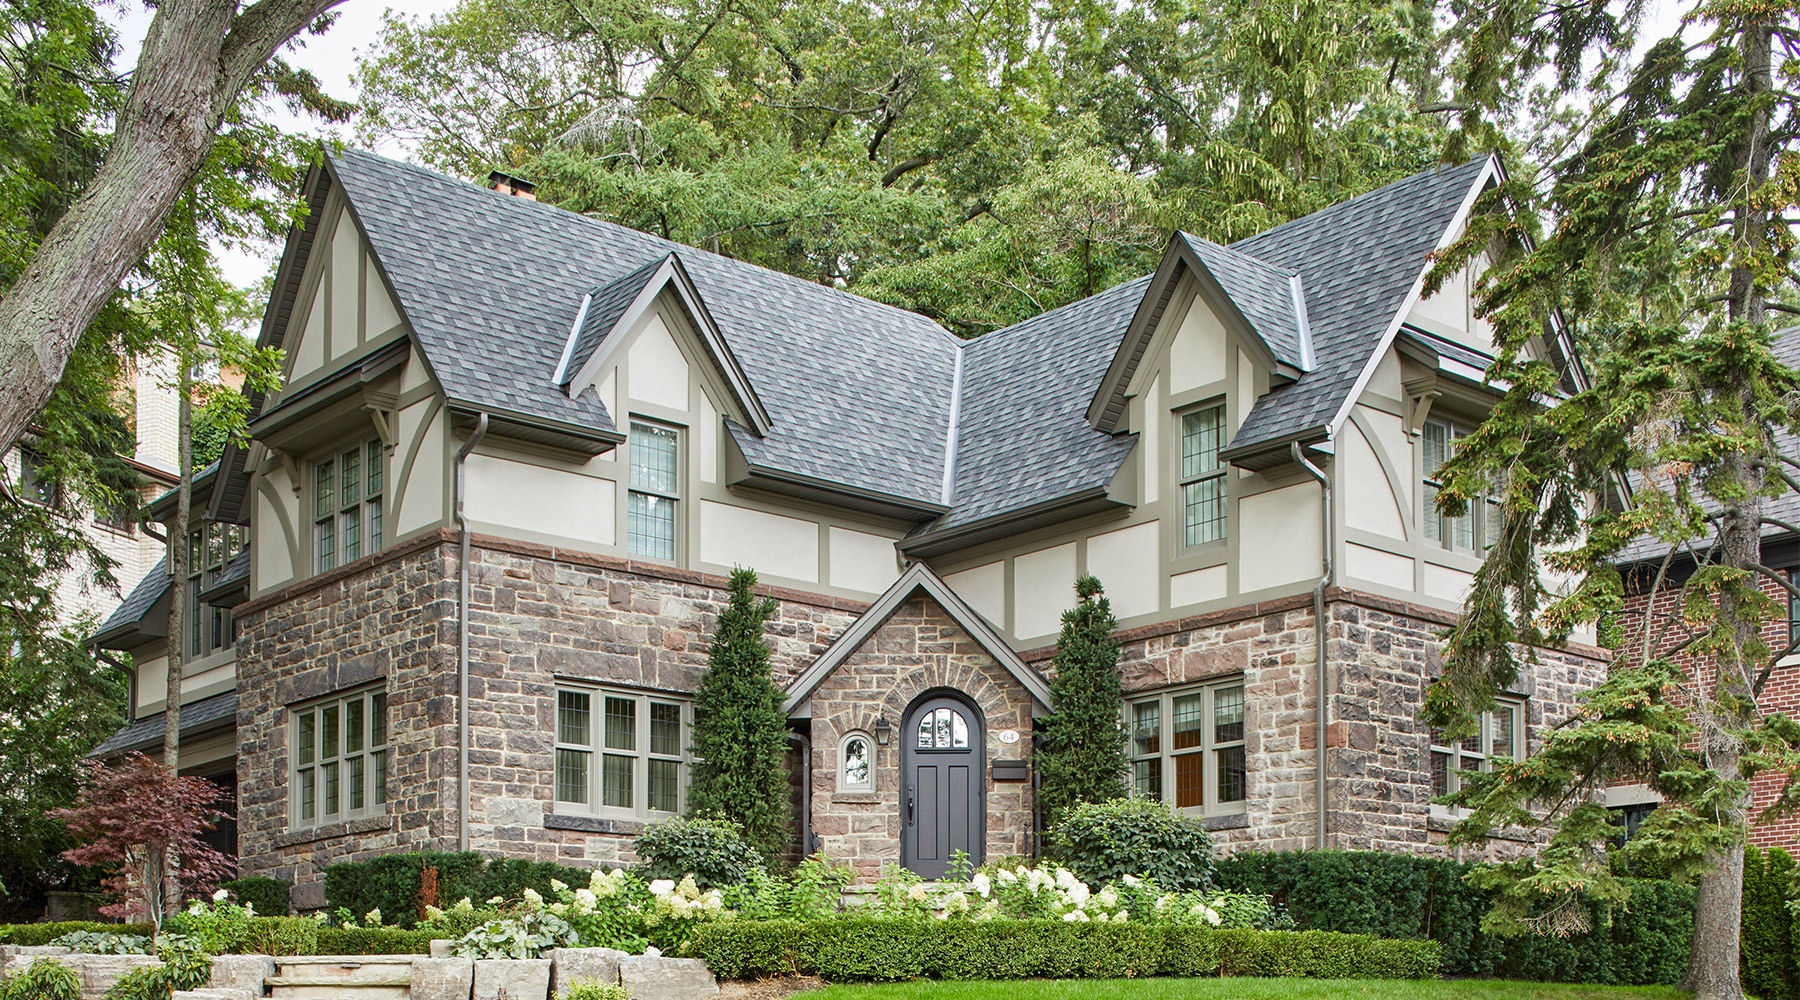 Front elevation with gables, shingled roof and beige frame windows.